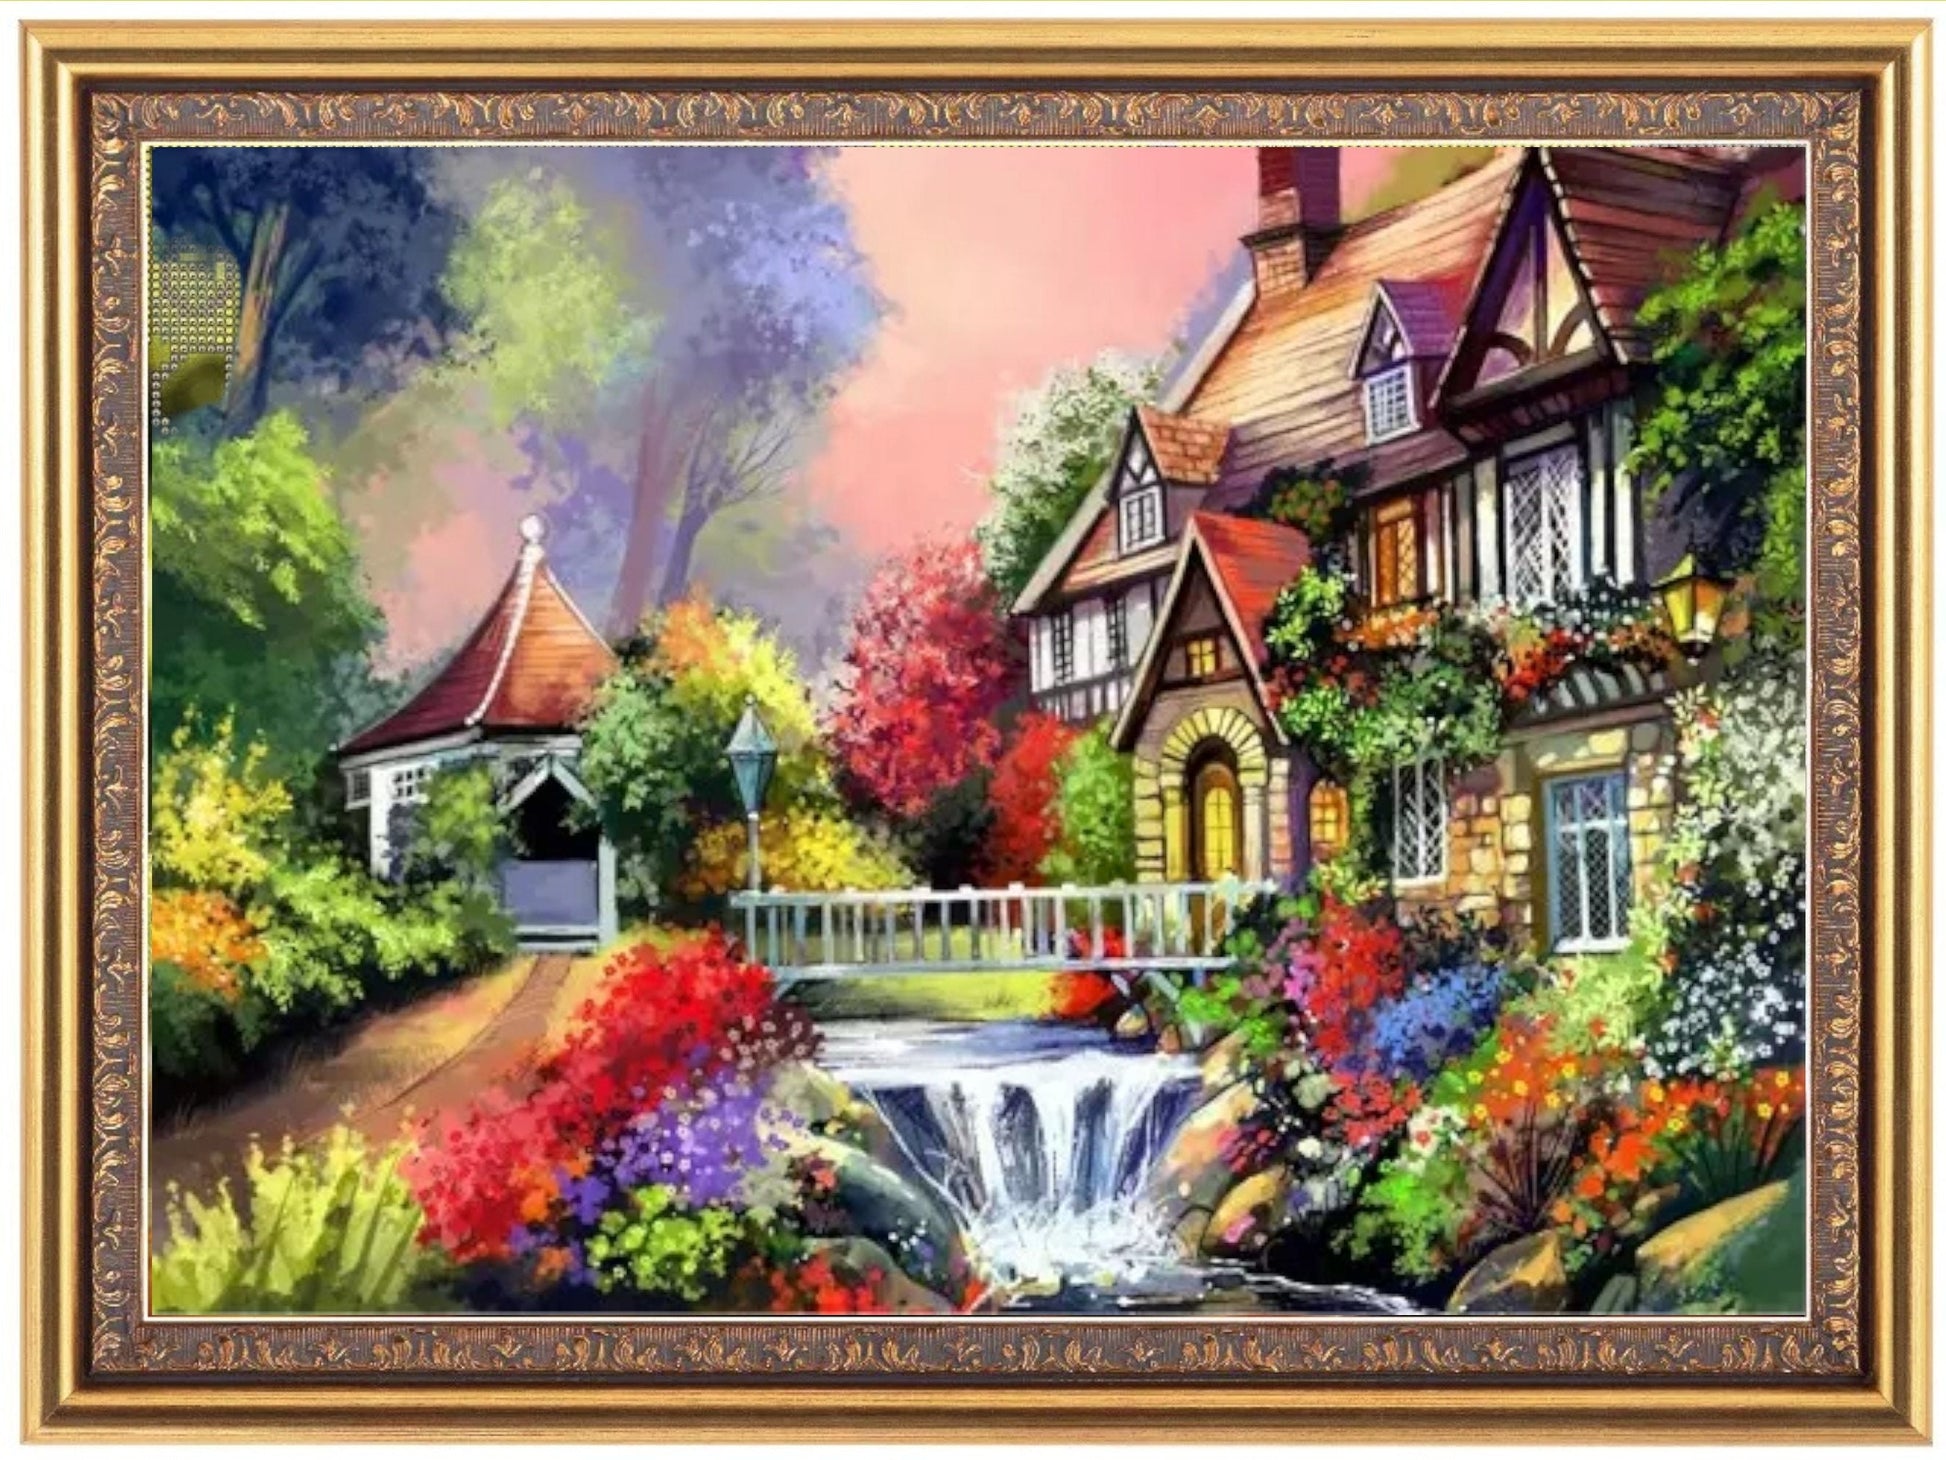 DIY Bead embroidery kit "House by the river". Size: 13.4-11.0 in (34.5-28.5cm) - VadymShop